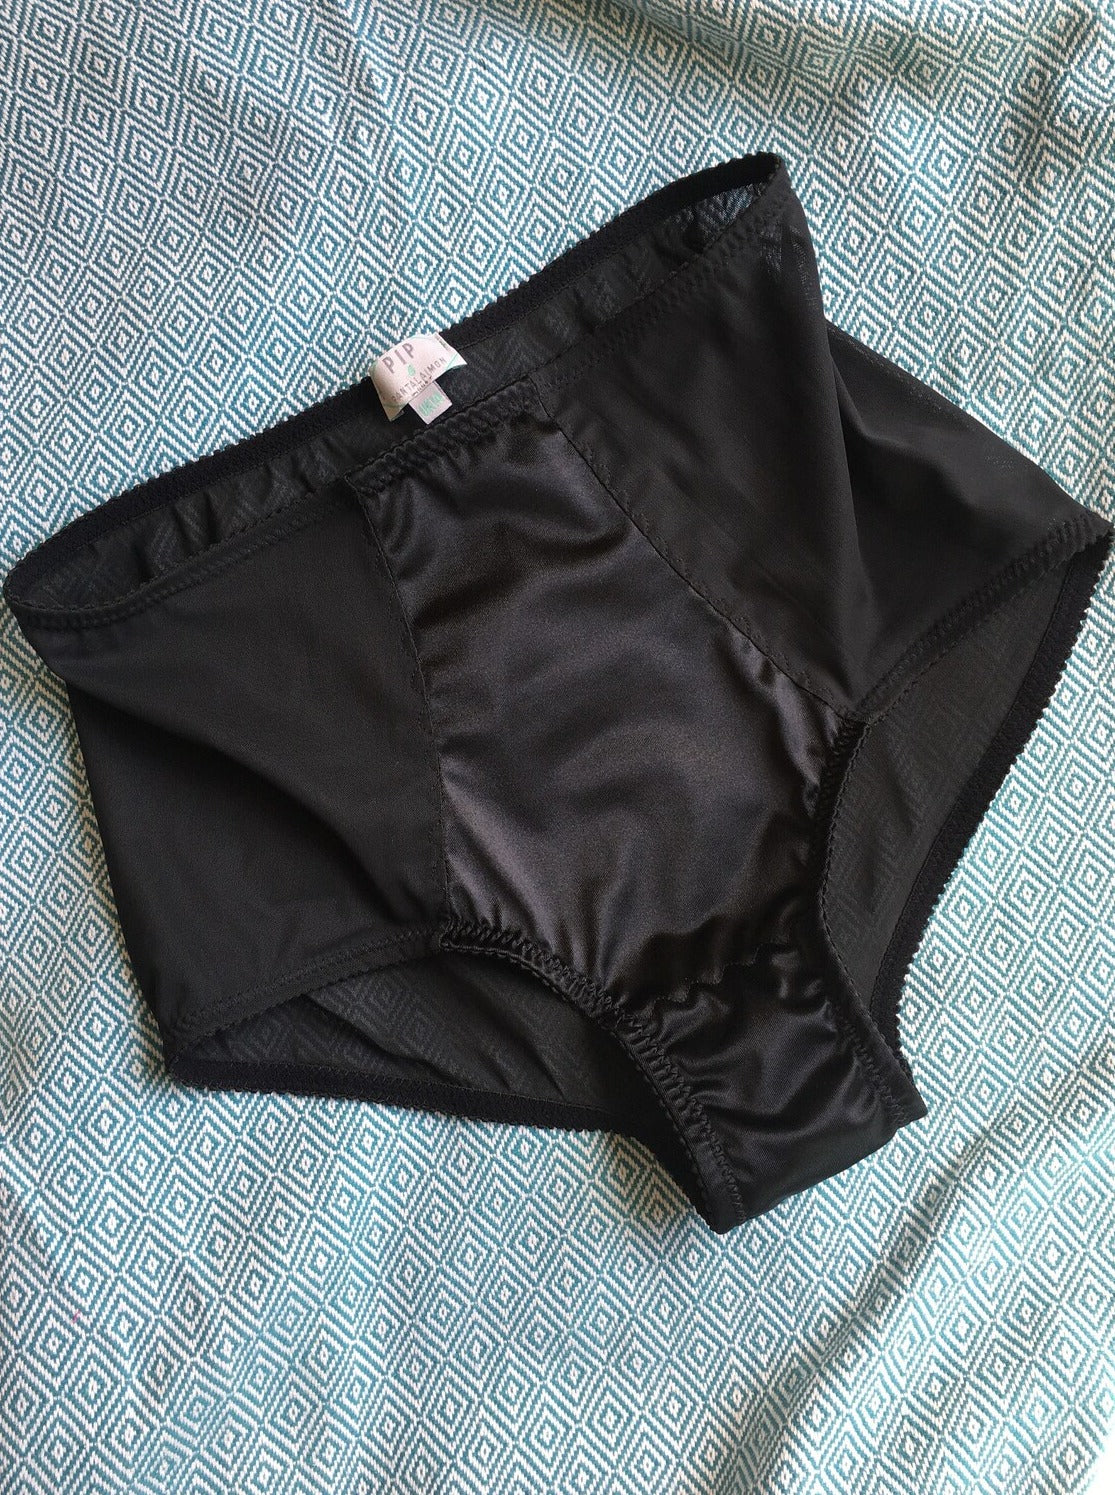 Black Classic High Waisted Knicker ~ Pip and Pantalaimon – Pip